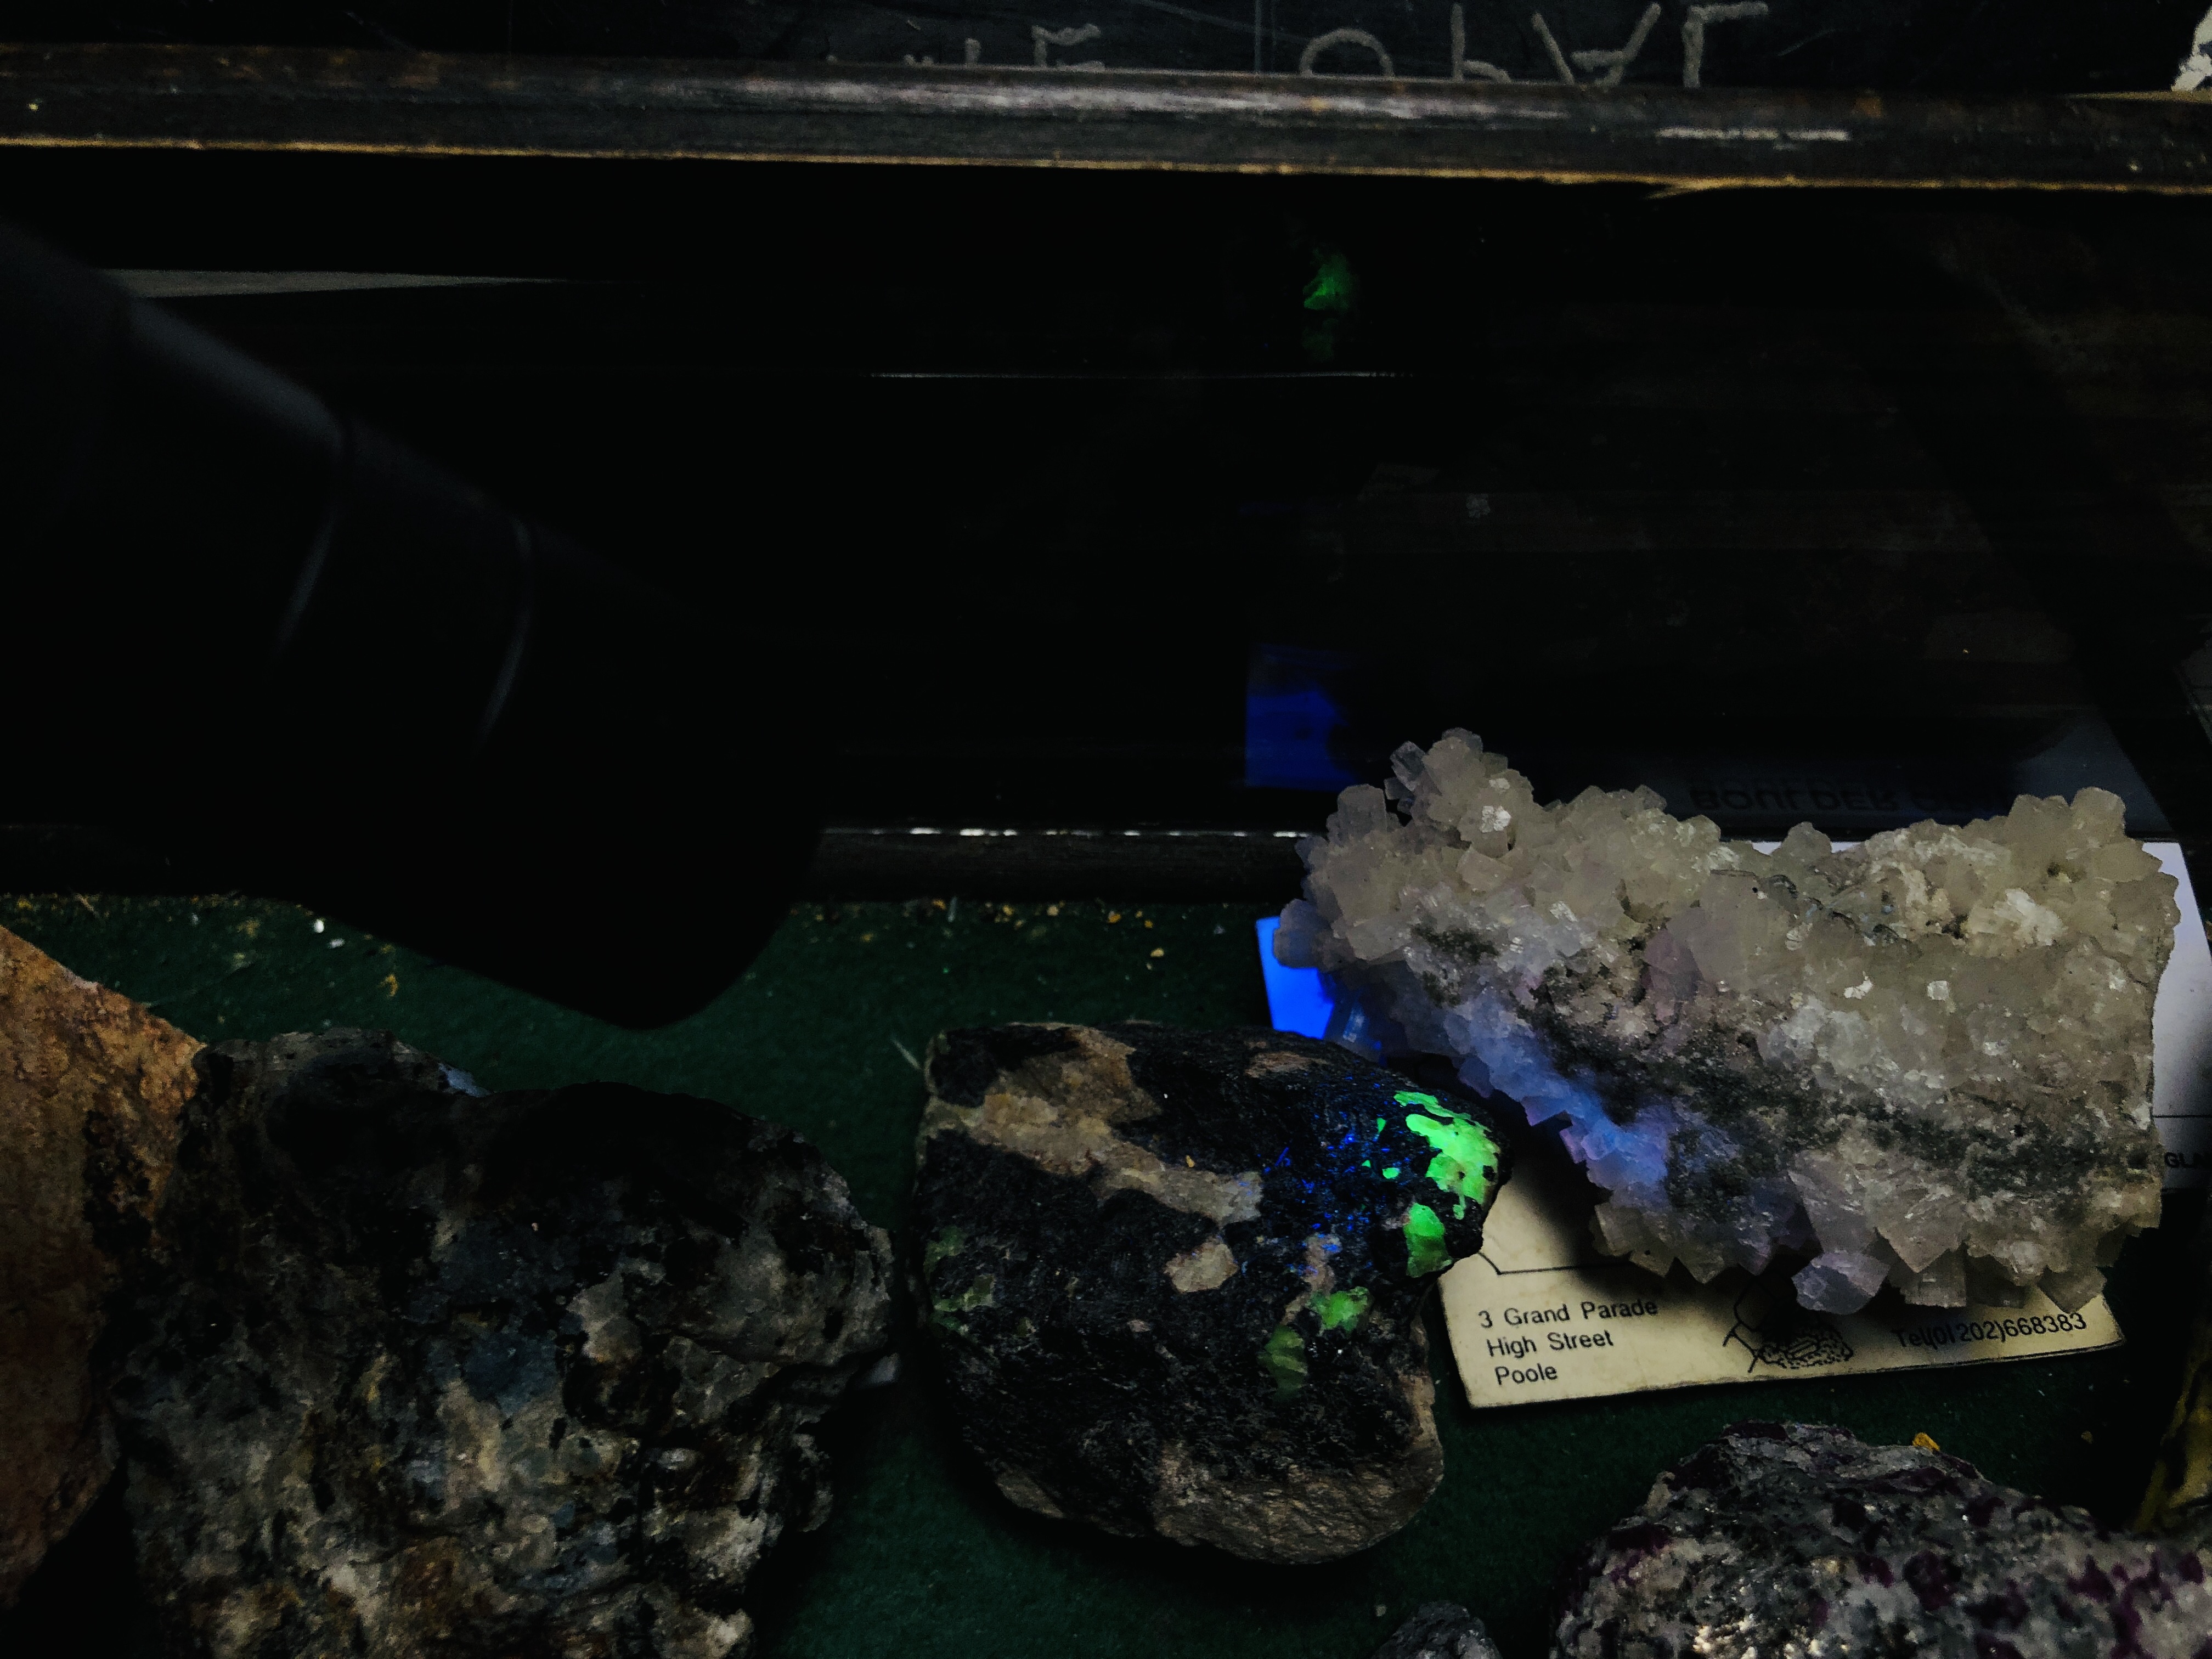 A COLLECTION OF CRYSTAL AND MINERAL ROCK EXAMPLES IN A DISPLAY CASE INSCRIBED "THE OPAL" FOR IN - Image 3 of 5